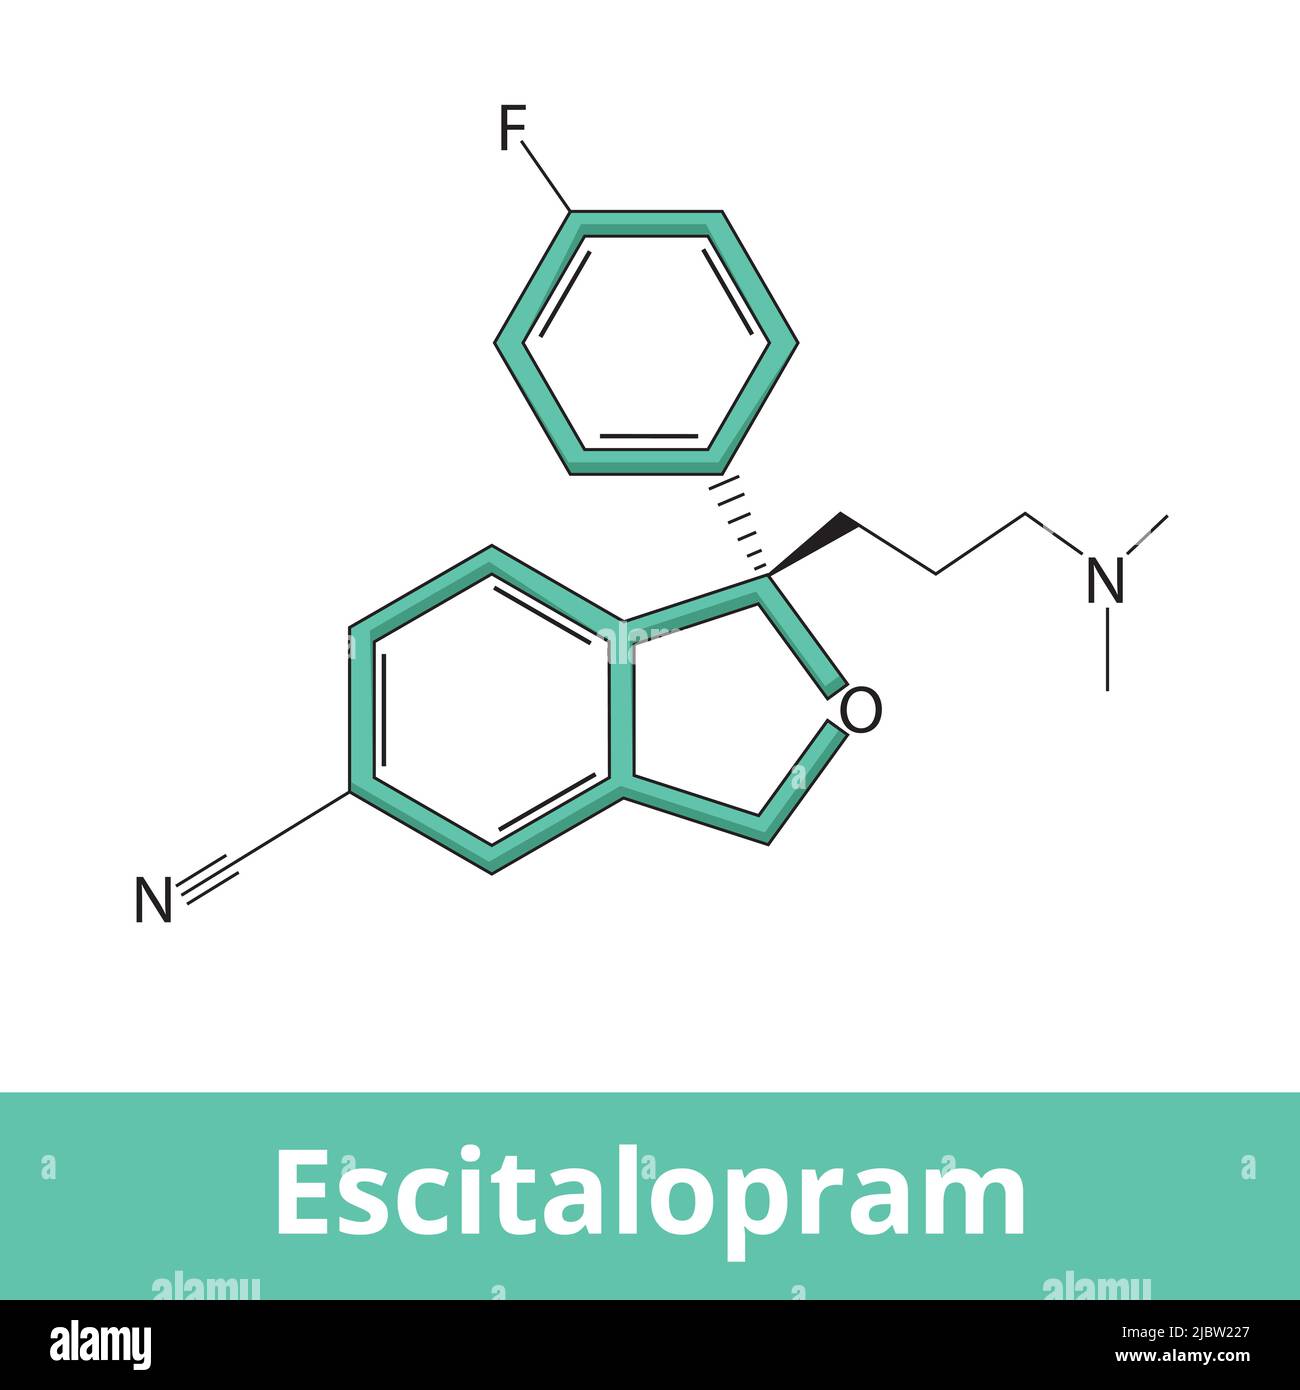 Chemical structure of escitalopram. Escitalopram is a selective serotonin reuptake inhibitor (SSRI) used for the treatment of the major depression Stock Vector